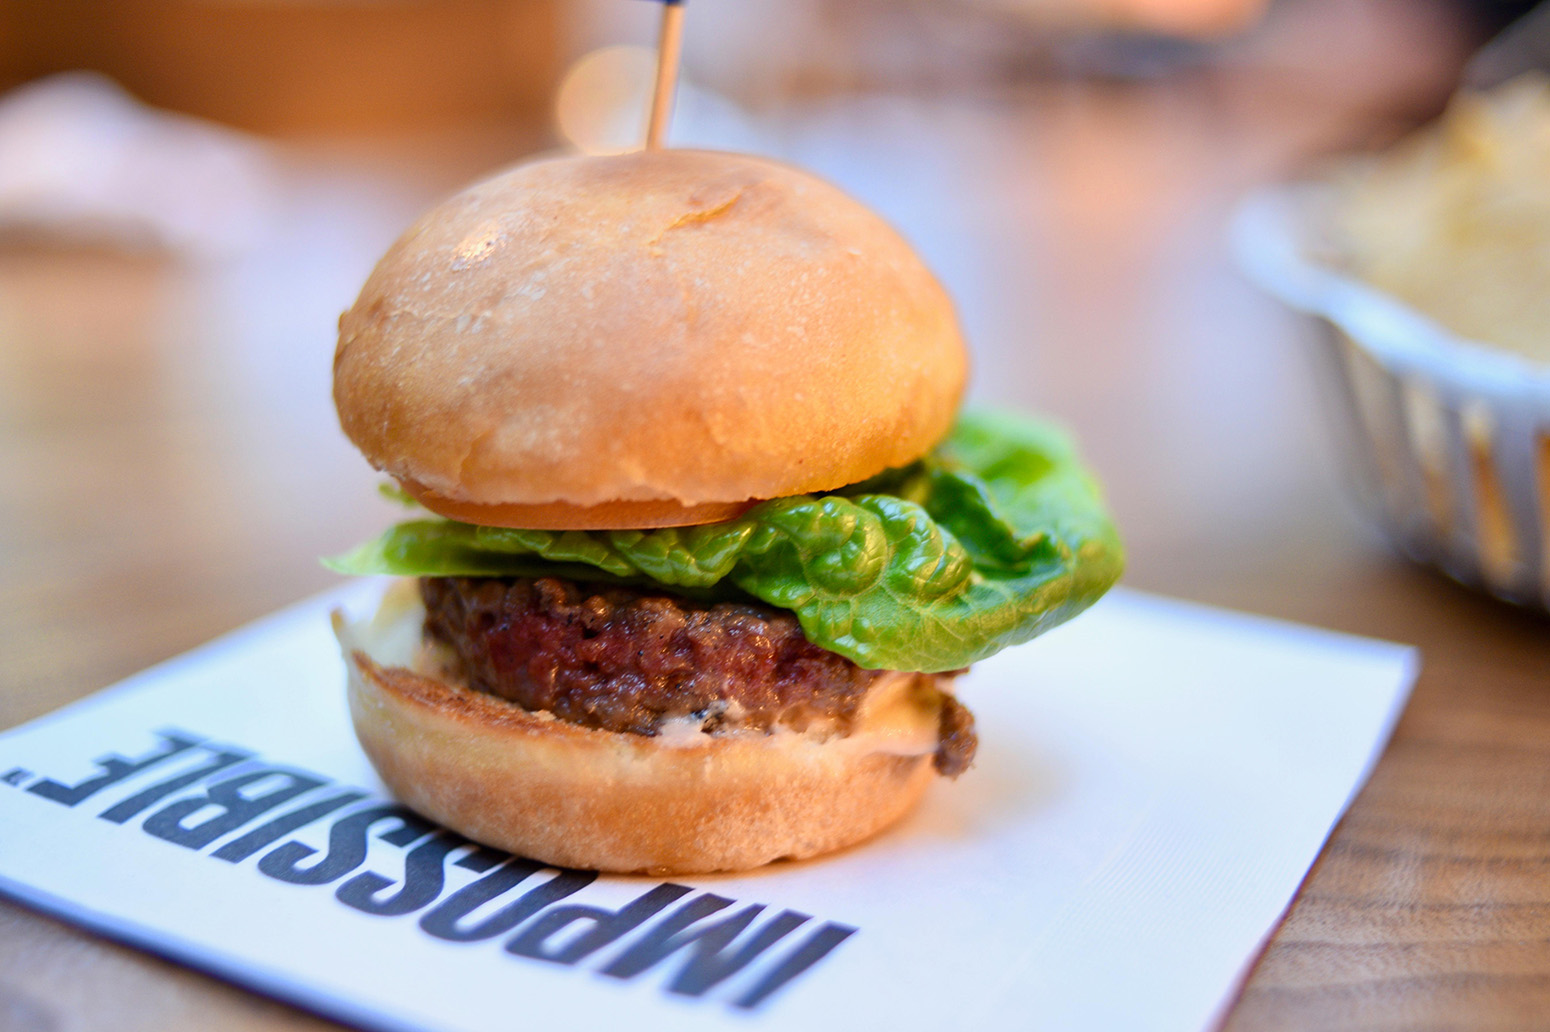 The Impossible Burger is sold in the United States, Hong Kong, and Macau. Credit: John D. Ivanko / Alamy Stock Photo.